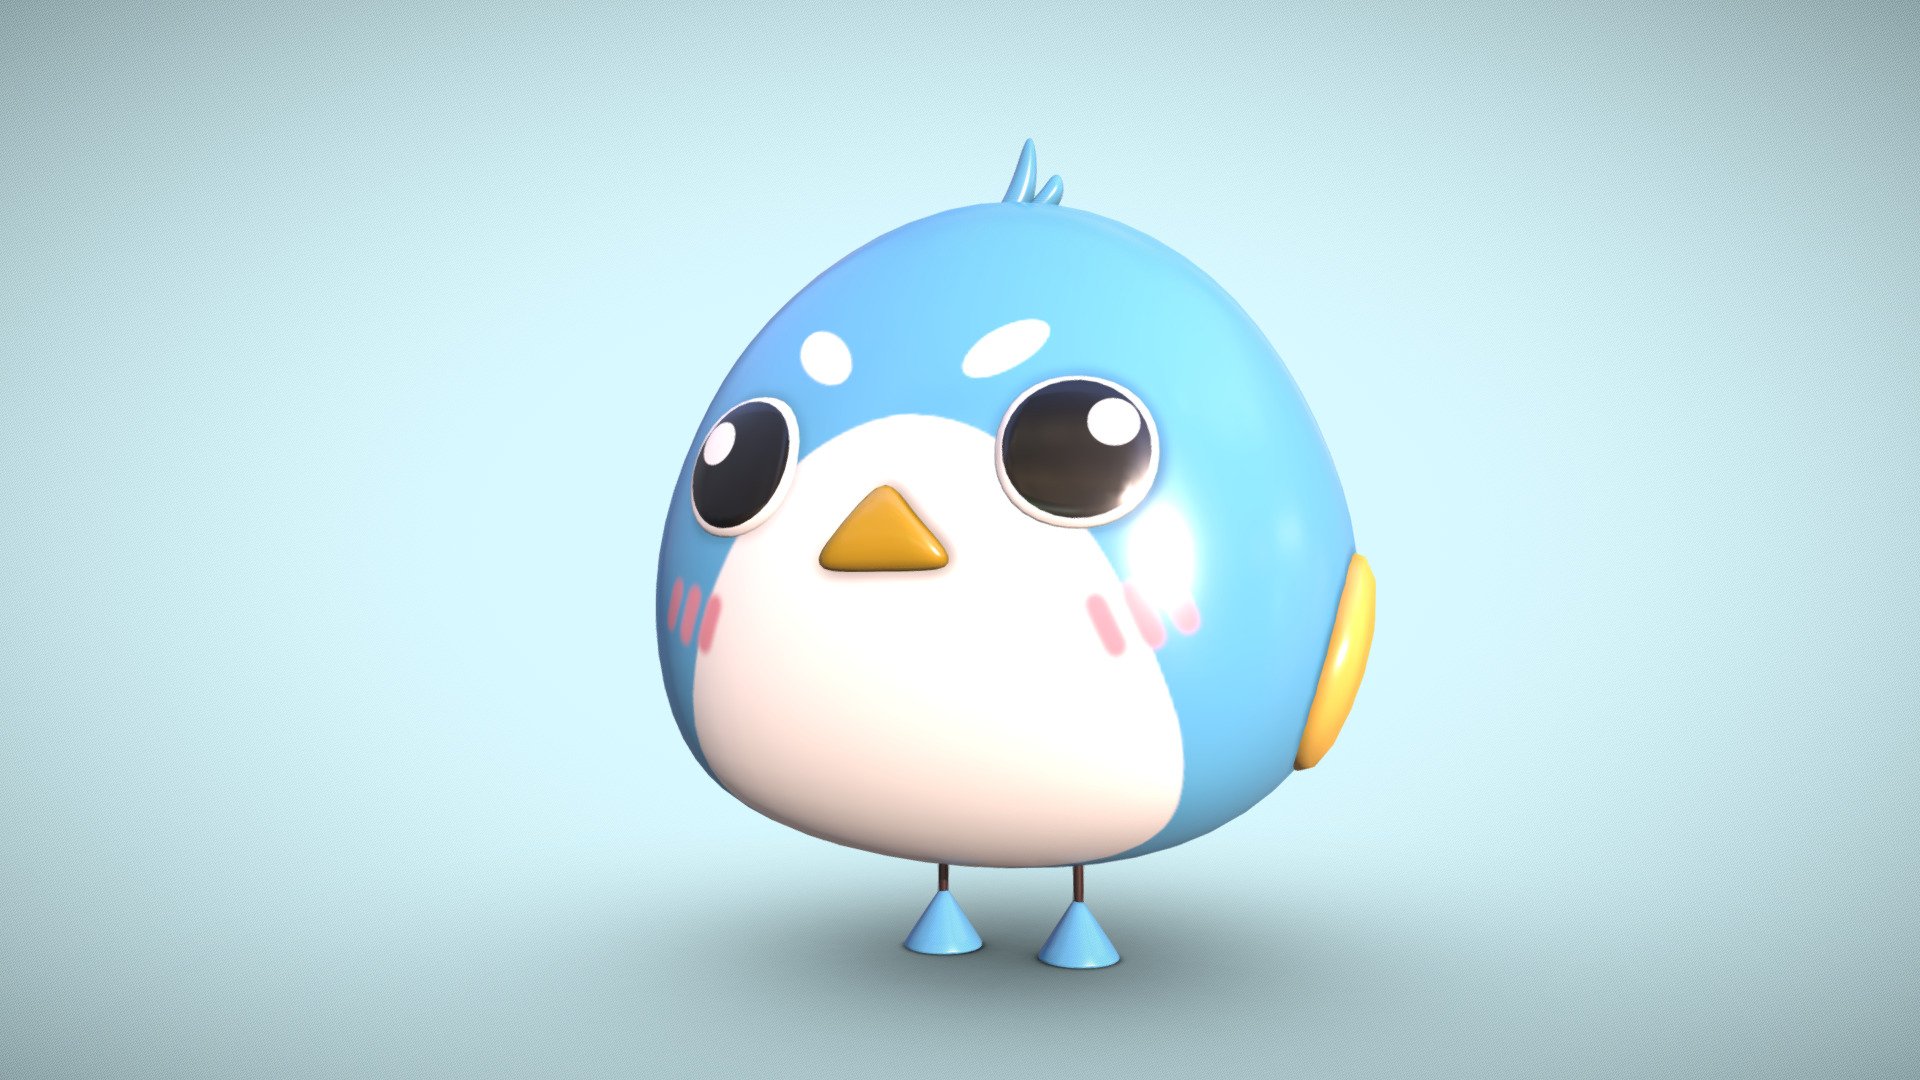 This high-quality 3D model captures the charm and whimsy of cartoon birds, bringing a playful and delightful touch to your virtual environment. The model accurately represents the physical design and features of cartoon-style birds, perfect for adding character to animations, games, or creative projects.

The cartoon birds feature exaggerated proportions and vibrant colors, embodying the essence of whimsical illustration. The model showcases the unique characteristics of each bird, 

The model is optimized for visualization purposes, with clean geometry, vivid colors, and artistic textures. 

Whether you need them for animated shorts, educational content, or any other creative endeavor, these 3D cartoon birds will help you infuse your project with a sense of joy and creativity.

Note: Please remember to respect intellectual property rights and ensure you have the necessary permissions to use and distribute any 3D models or designs based on copyrighted characters or concepts 3d model